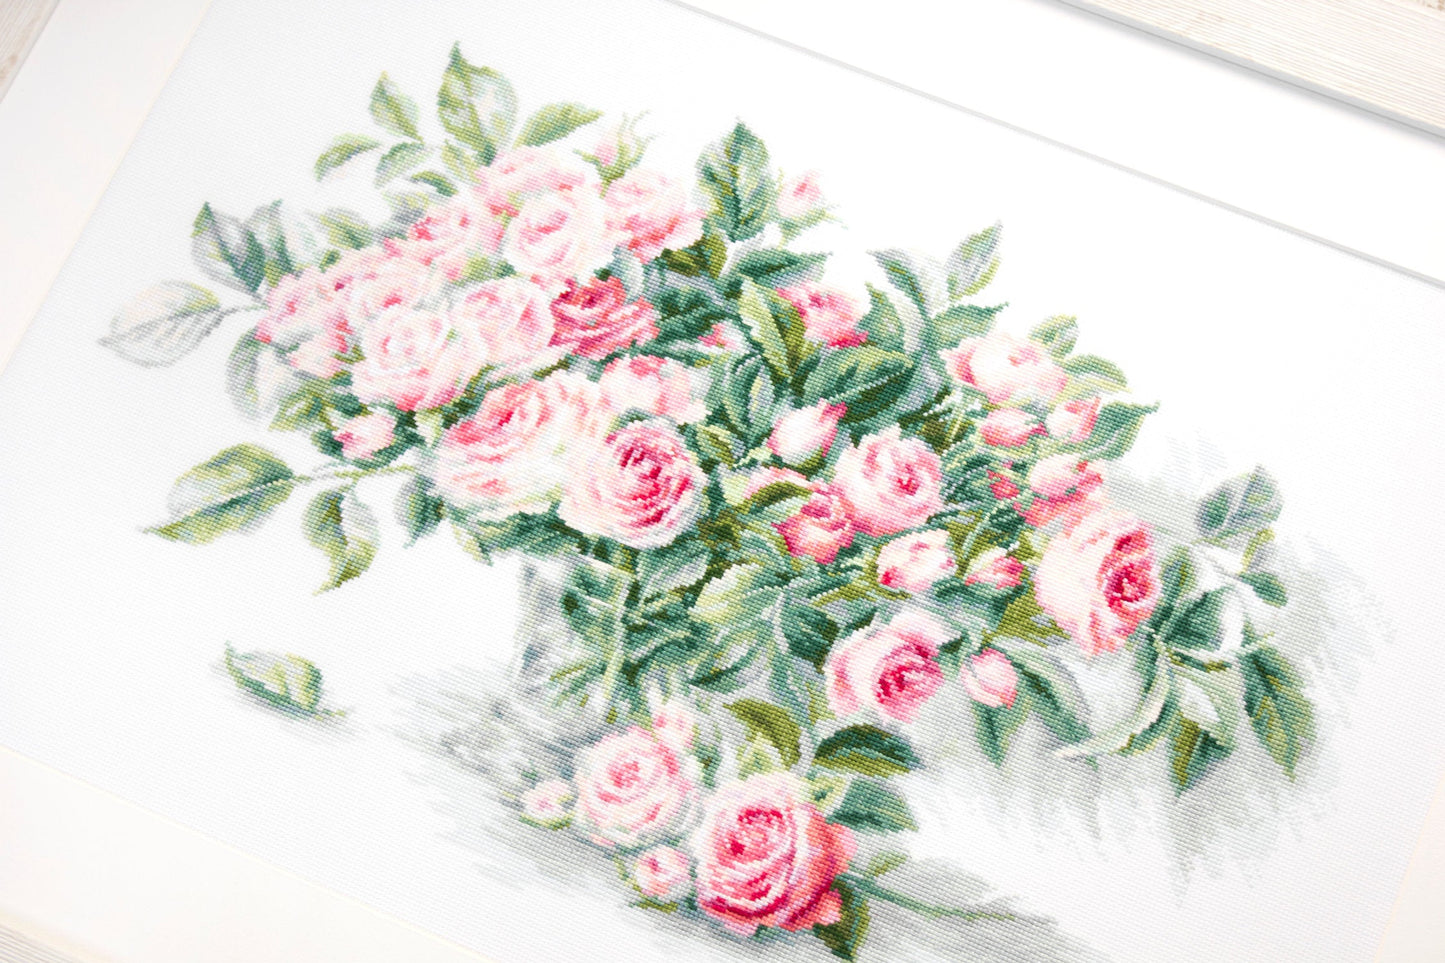 Cross Stitch Kit Luca-S - Bouquet of Pink Roses - HobbyJobby